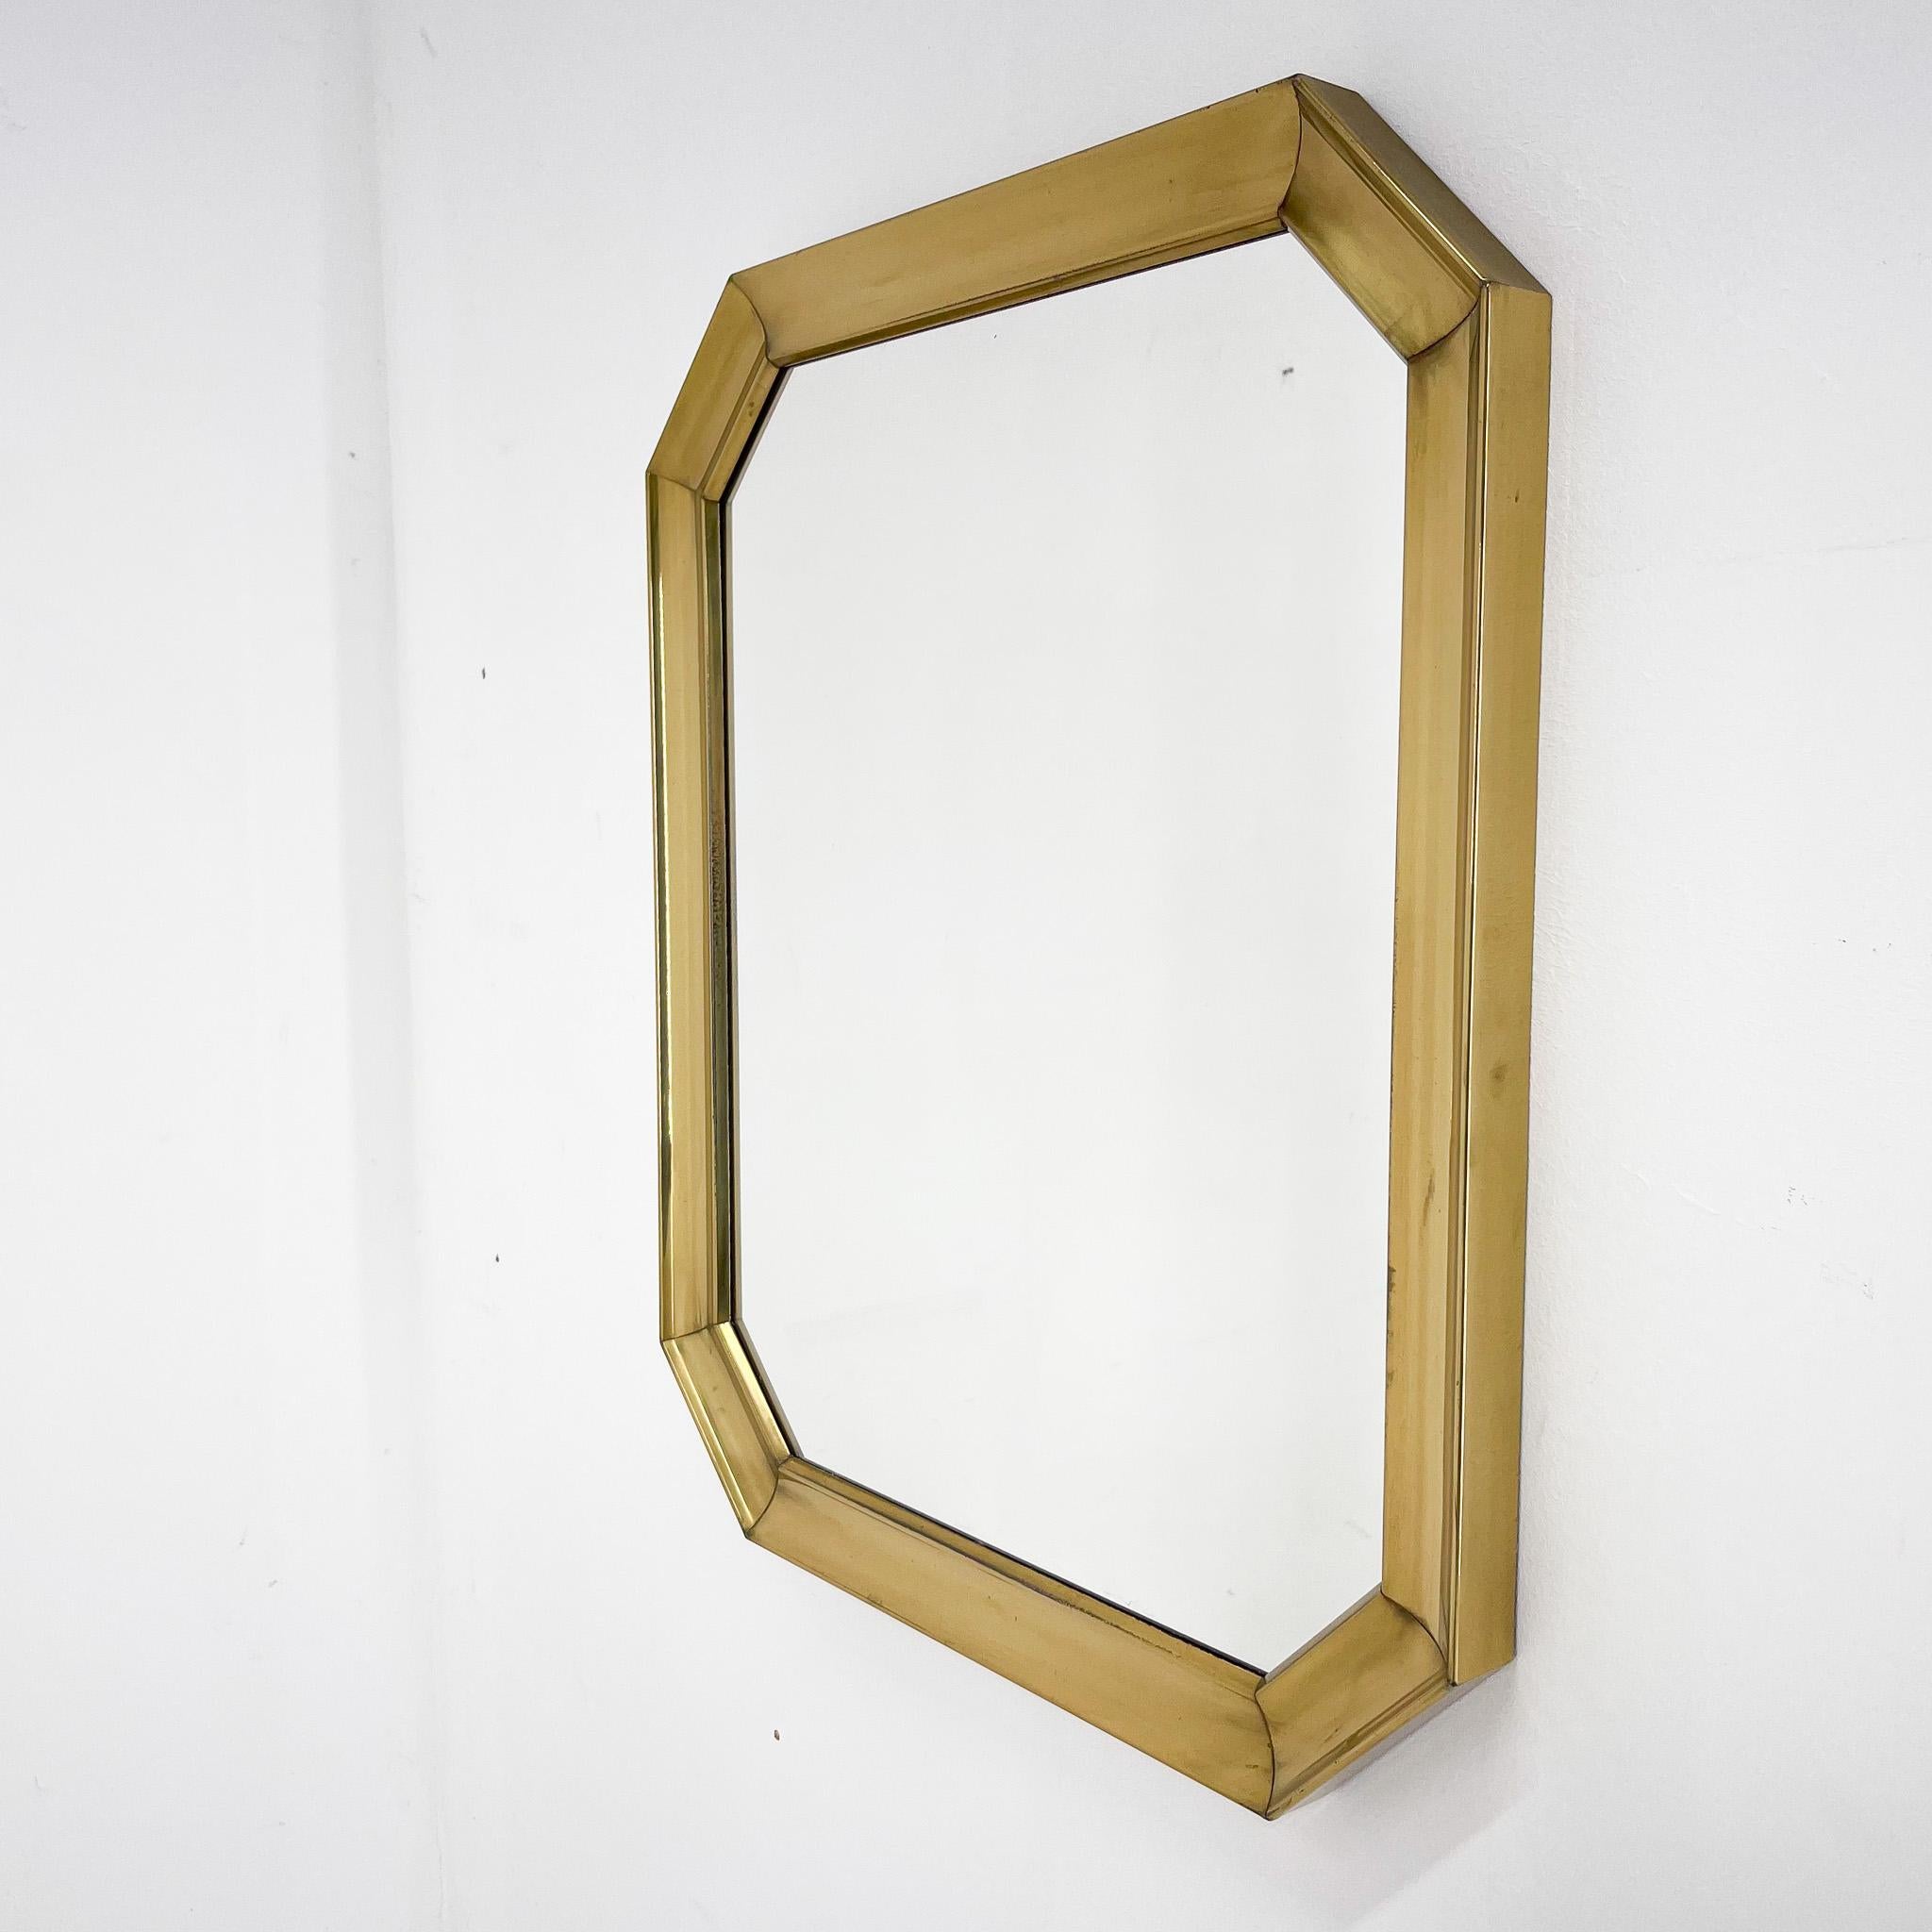 Vintage mirror made of metal in beautiful shape with original patina.